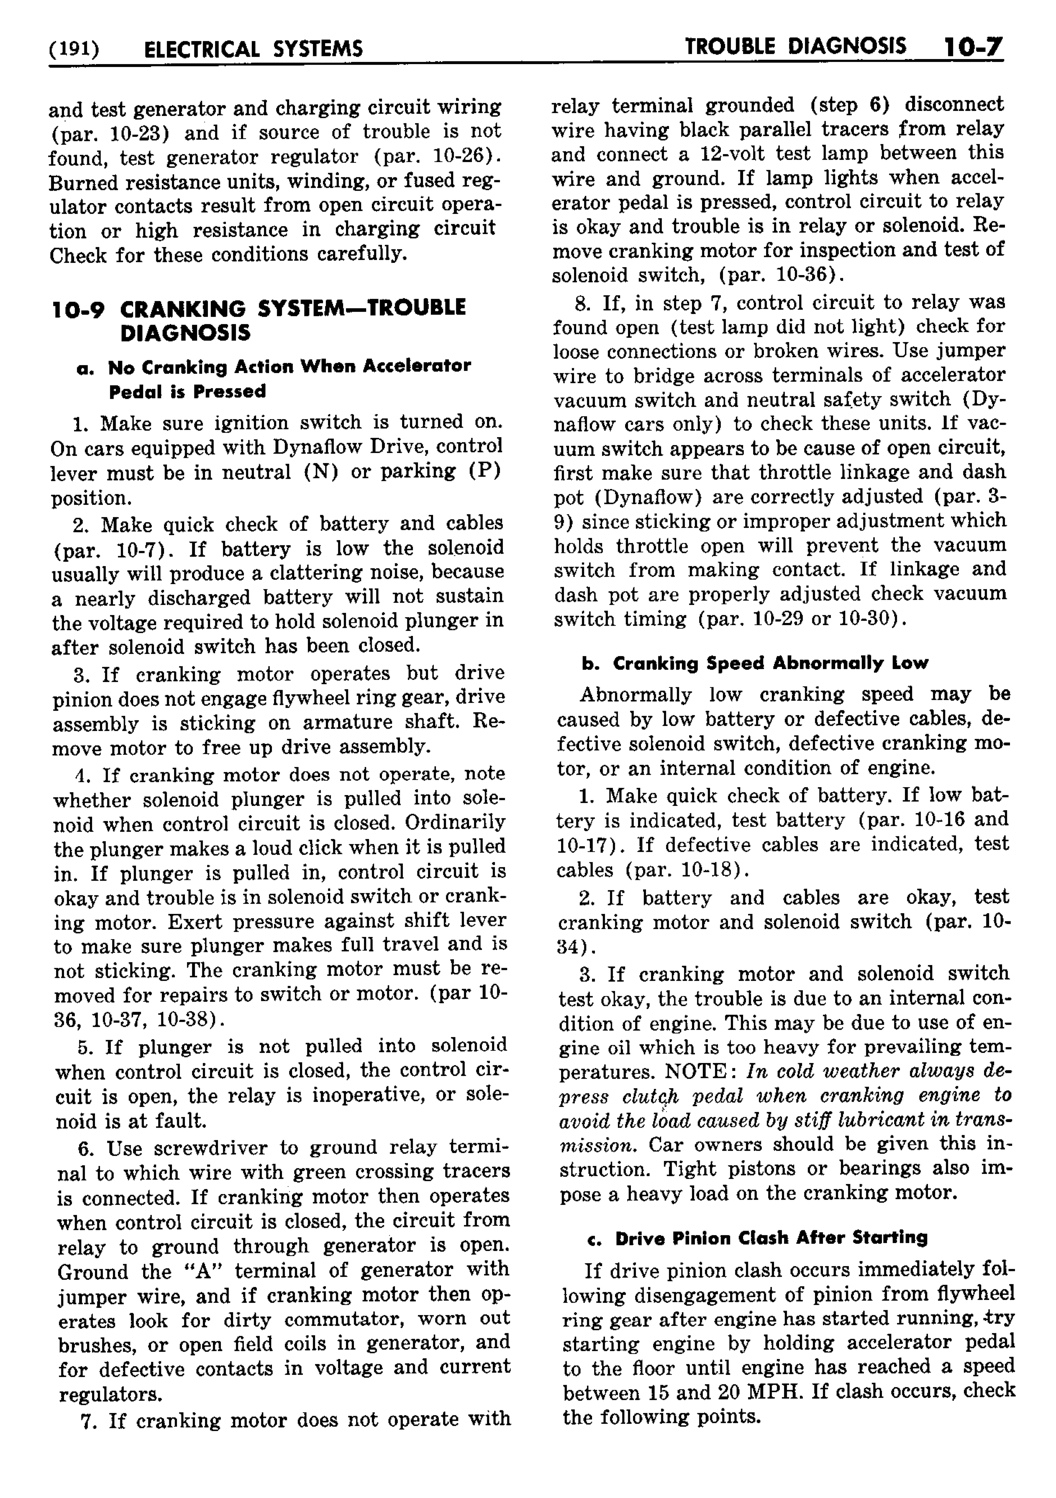 n_11 1953 Buick Shop Manual - Electrical Systems-007-007.jpg